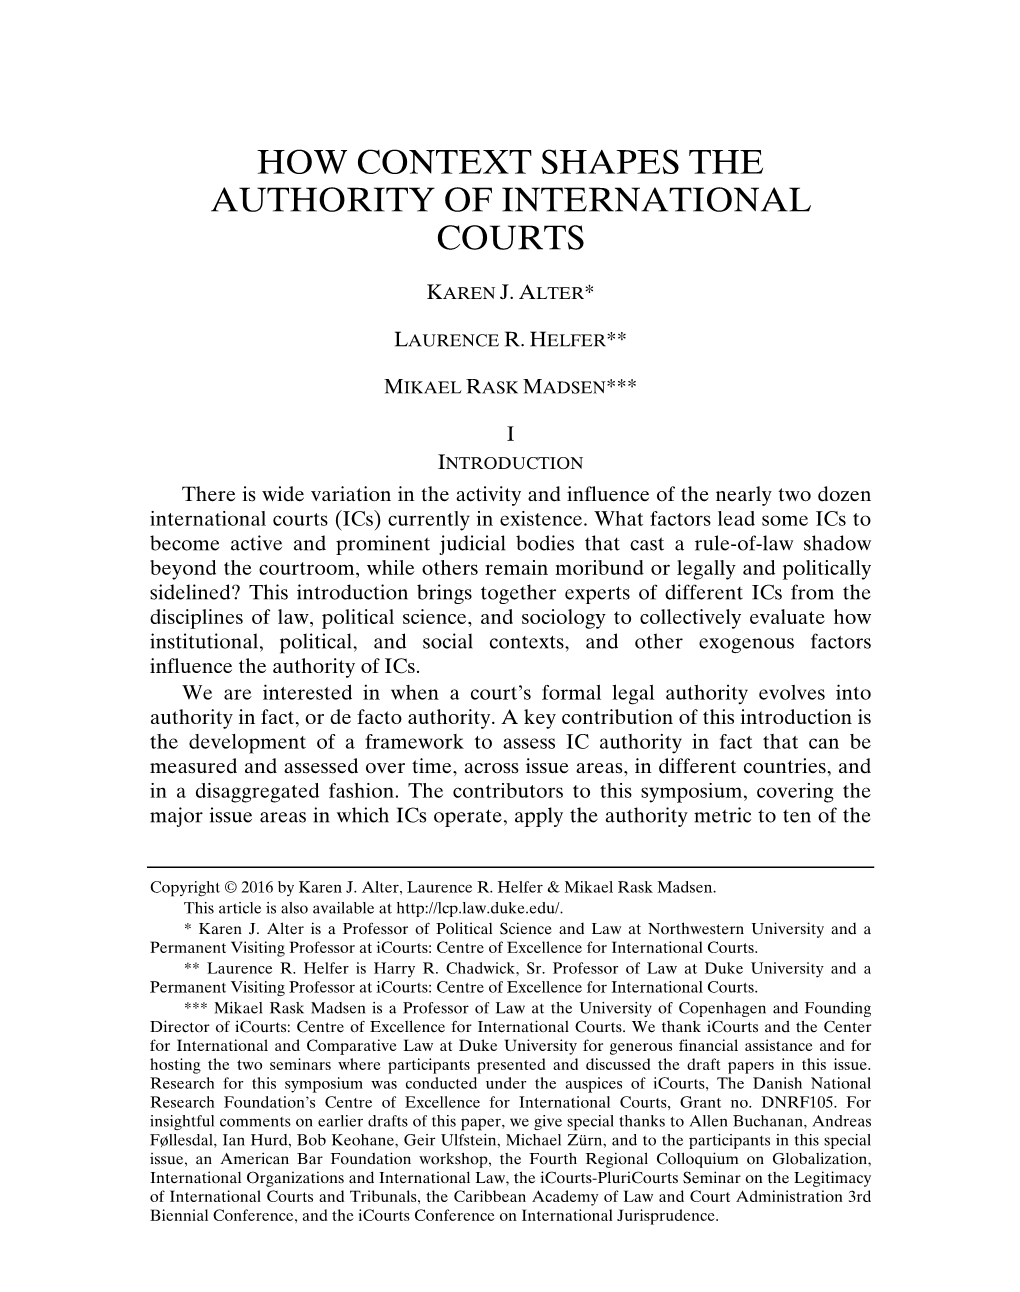 How Context Shapes the Authority of International Courts